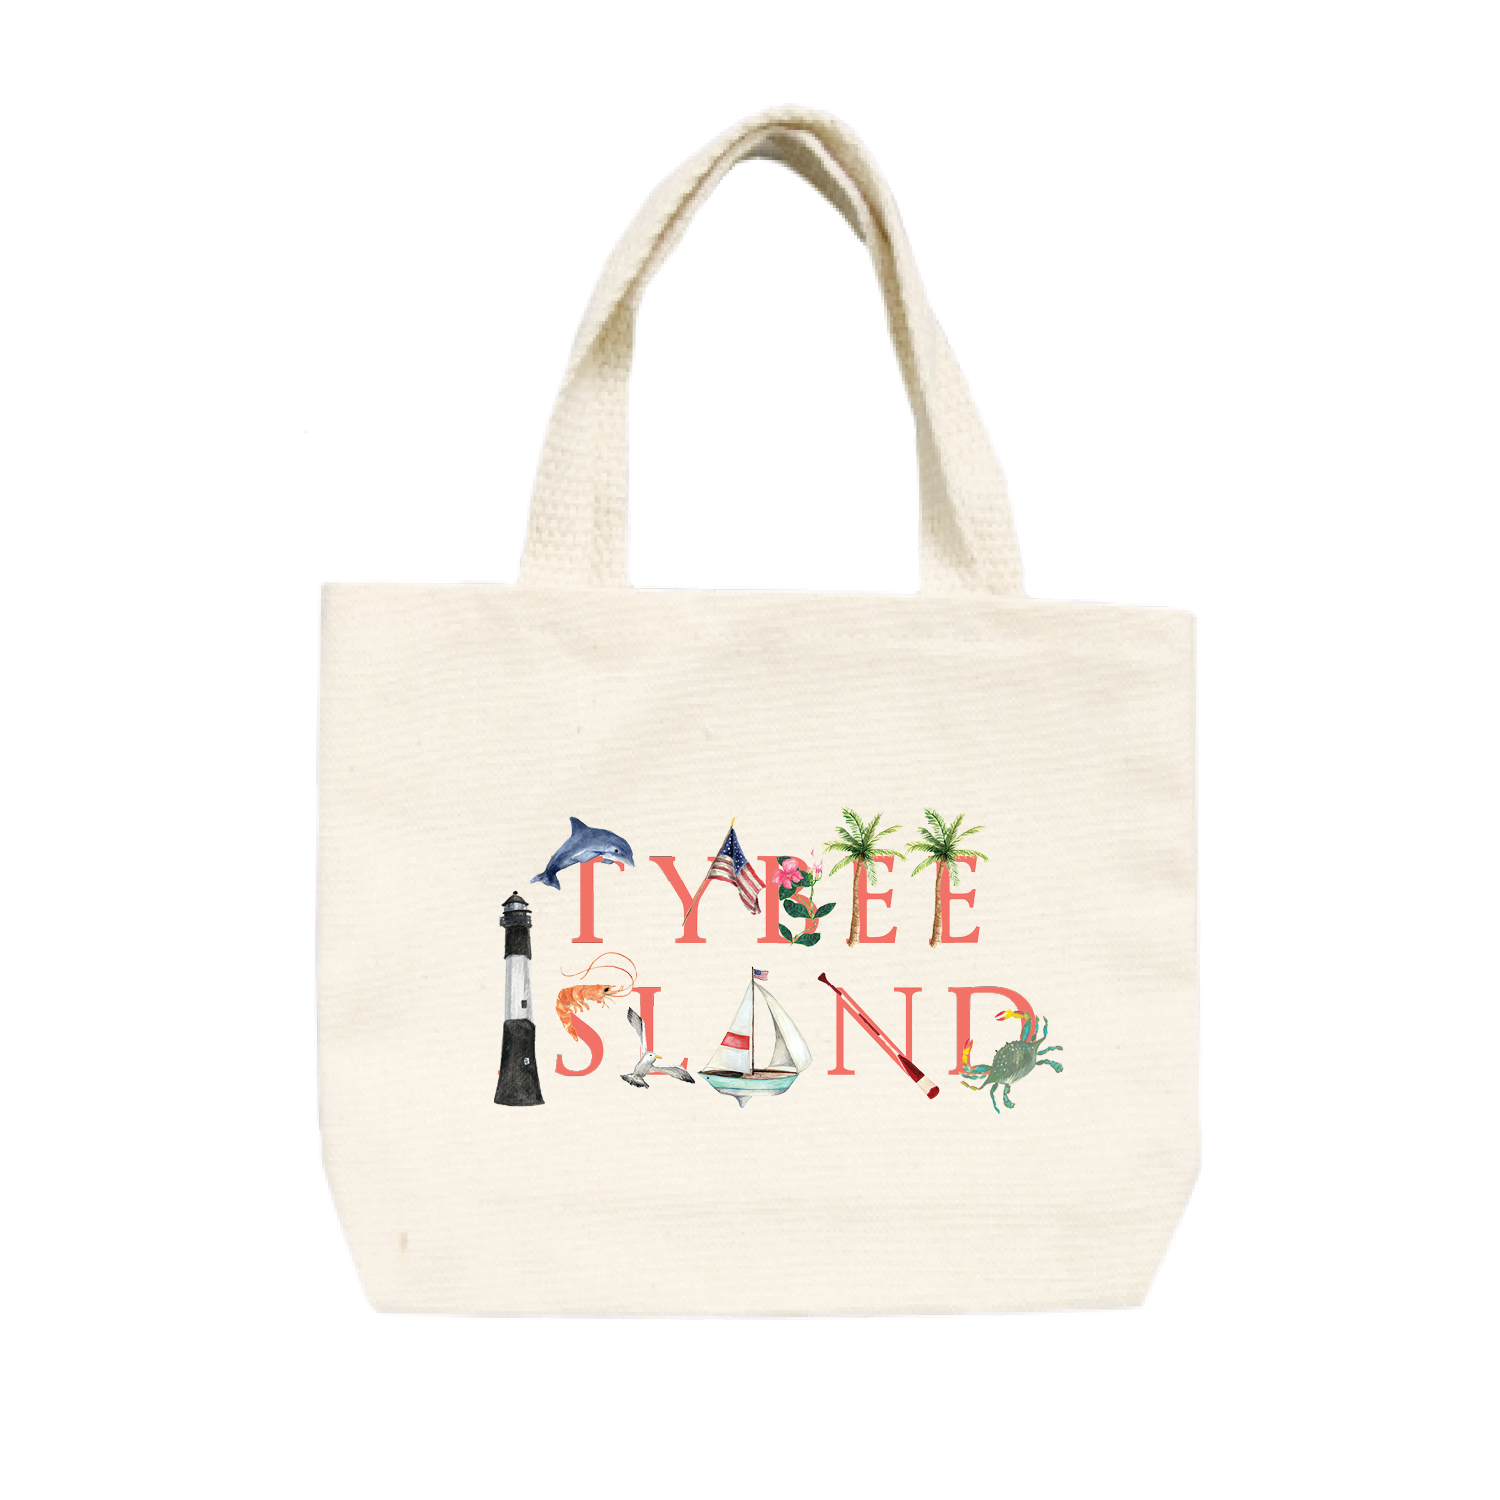 tybee small tote